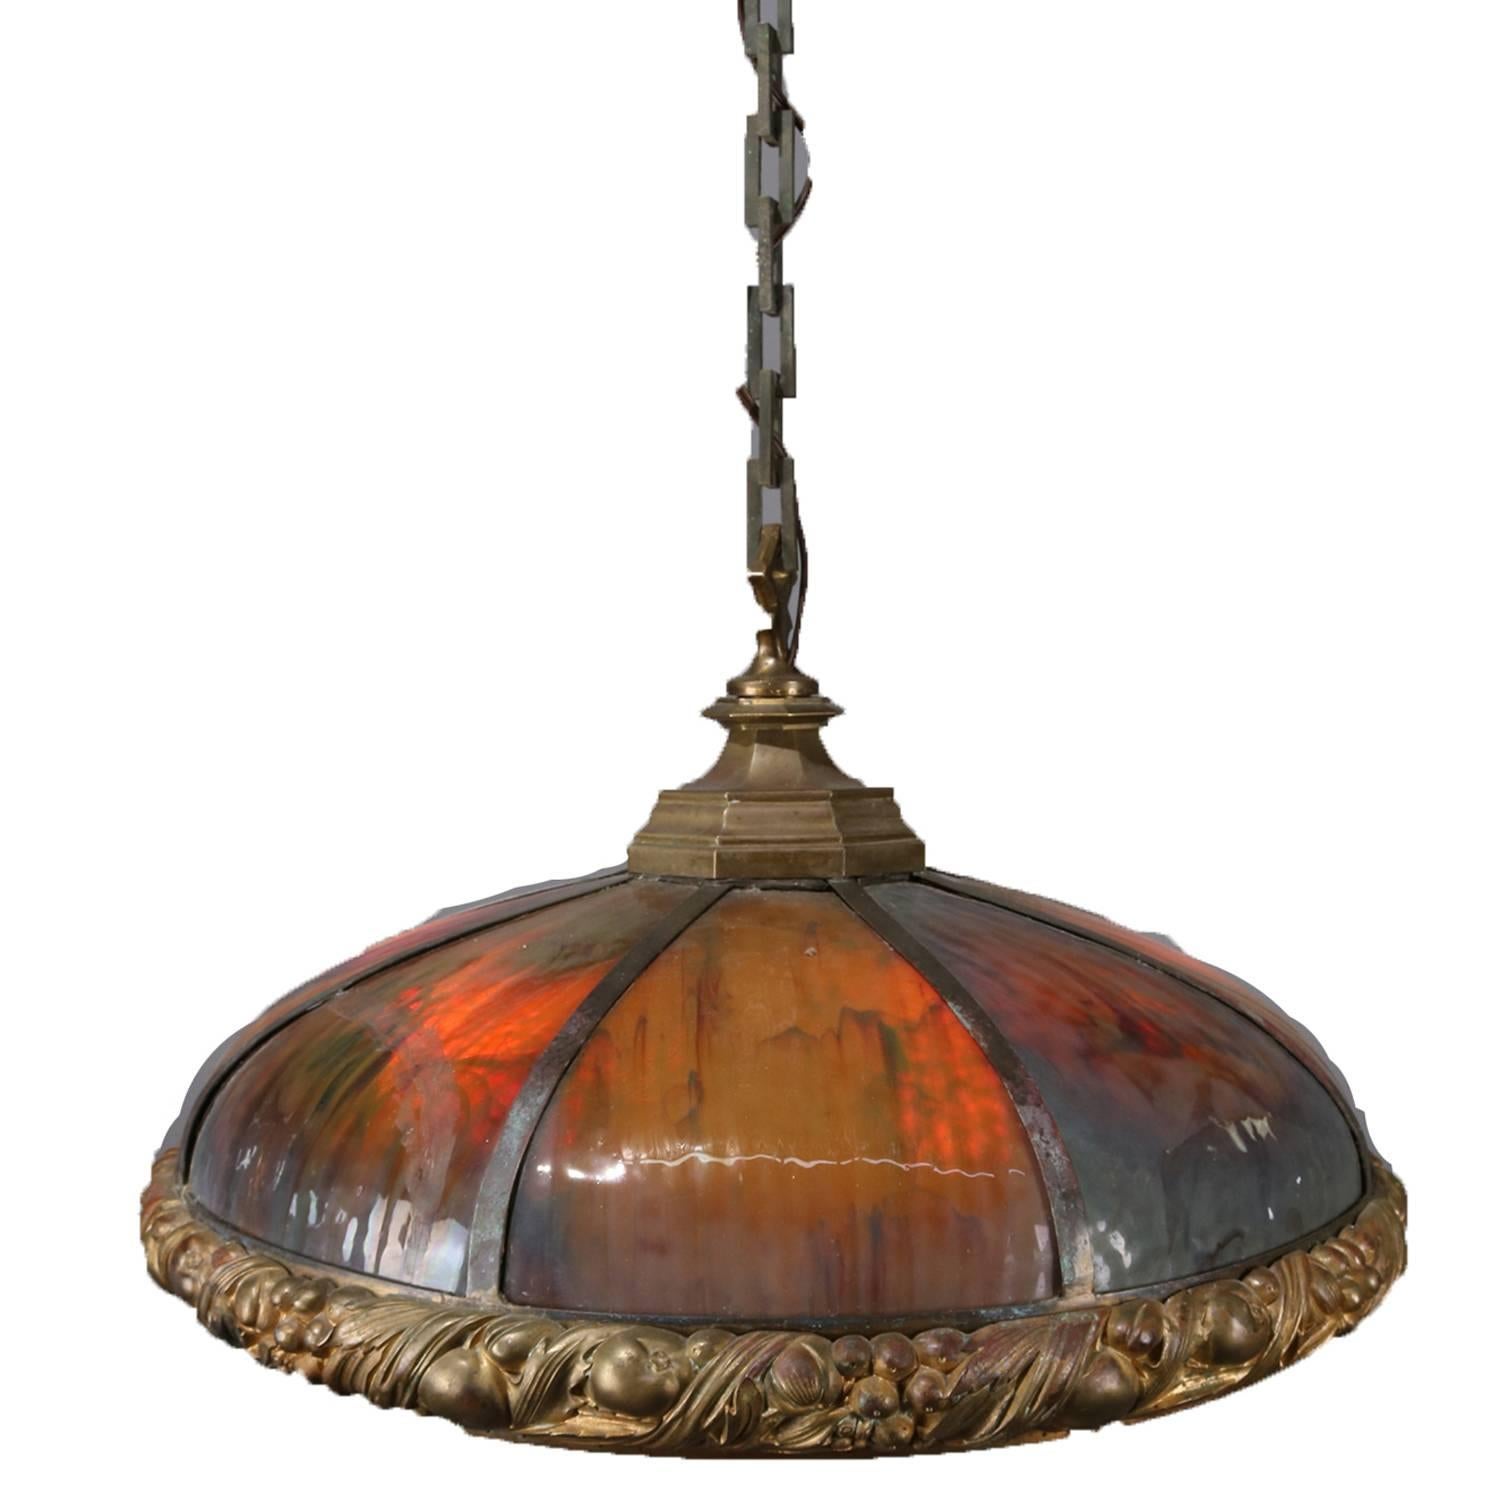 Arts & Crafts Bradley & Hubbard School six-light pendant dome chandelier features six bent slag panels seated in cast fruit and nut form gilt frame, newly re-wired, circa 1910.

Measures: 18